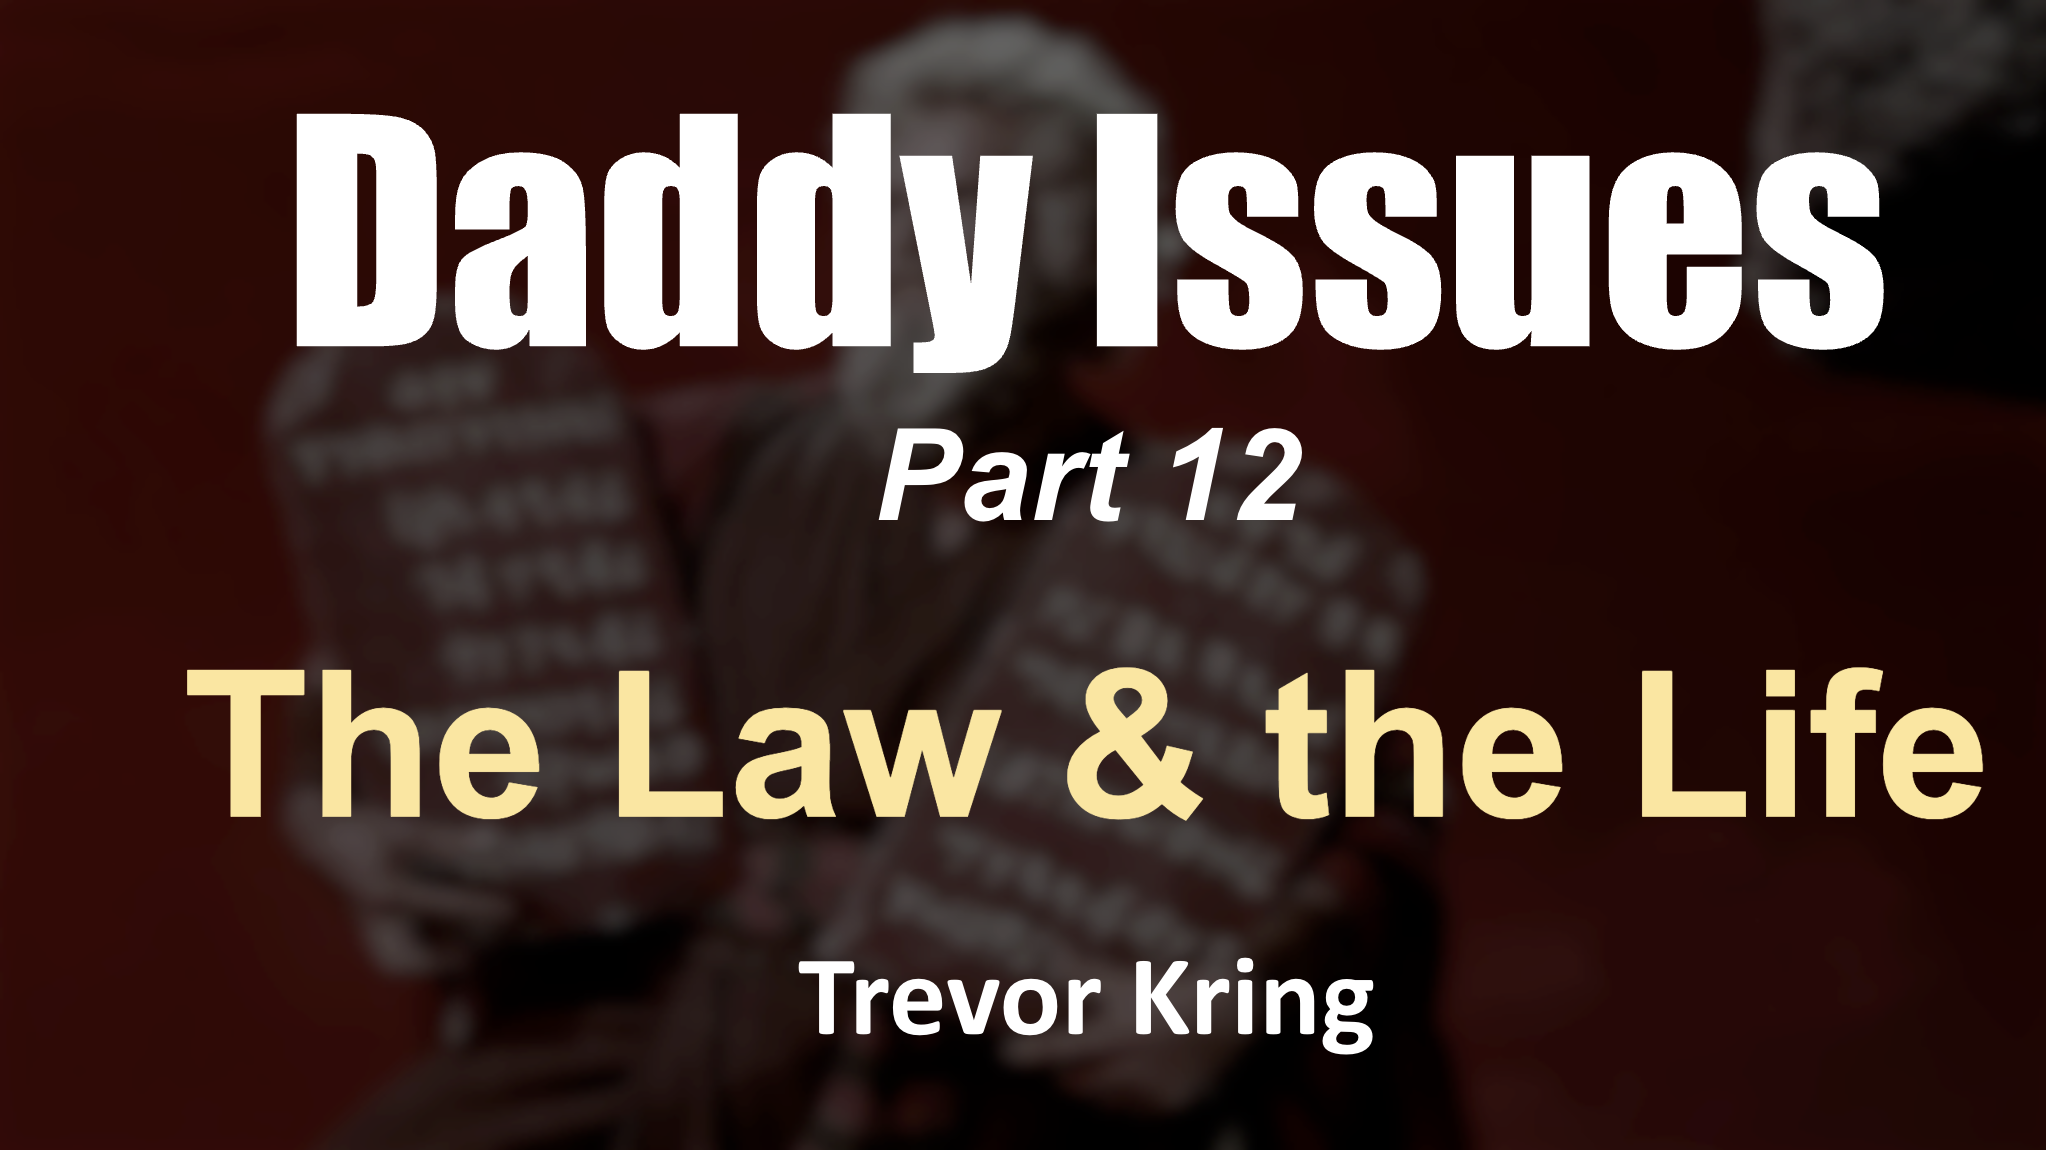 Daddy Issues - Part 12 The Law & the Life